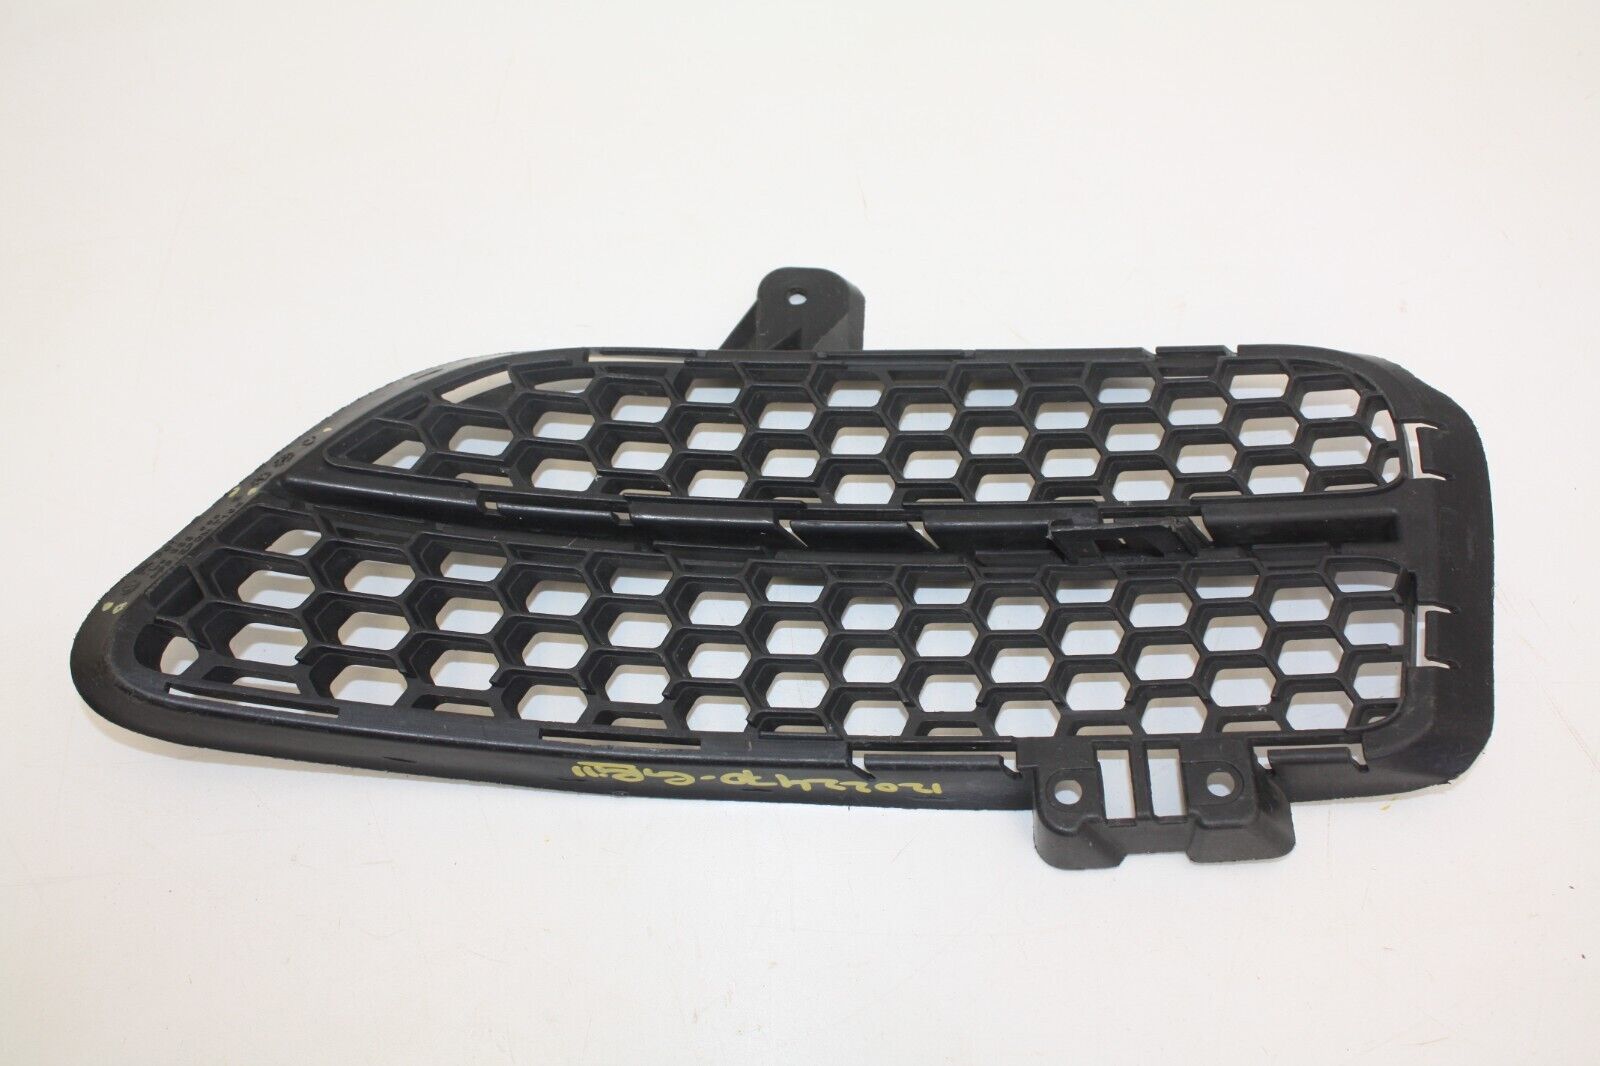 VW-Touareg-Front-Bumper-Right-Grill-2007-TO-2010-7L6853666B-Genuine-176241219097-4